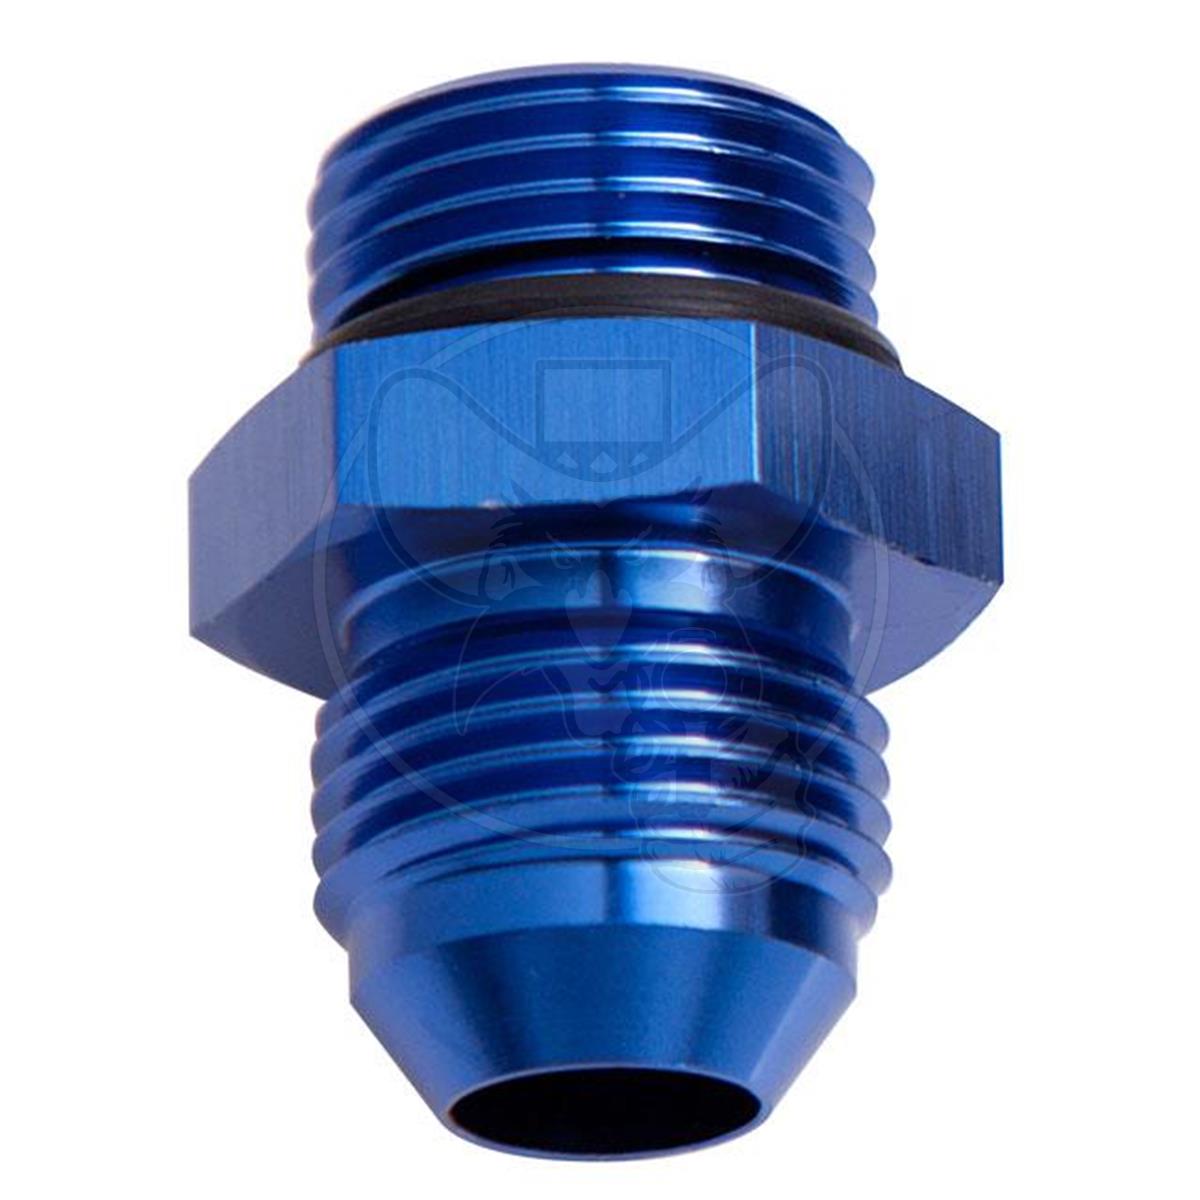 Aeroflow -10 ORB to -3AN Straight Male Flare Adapter - Blue